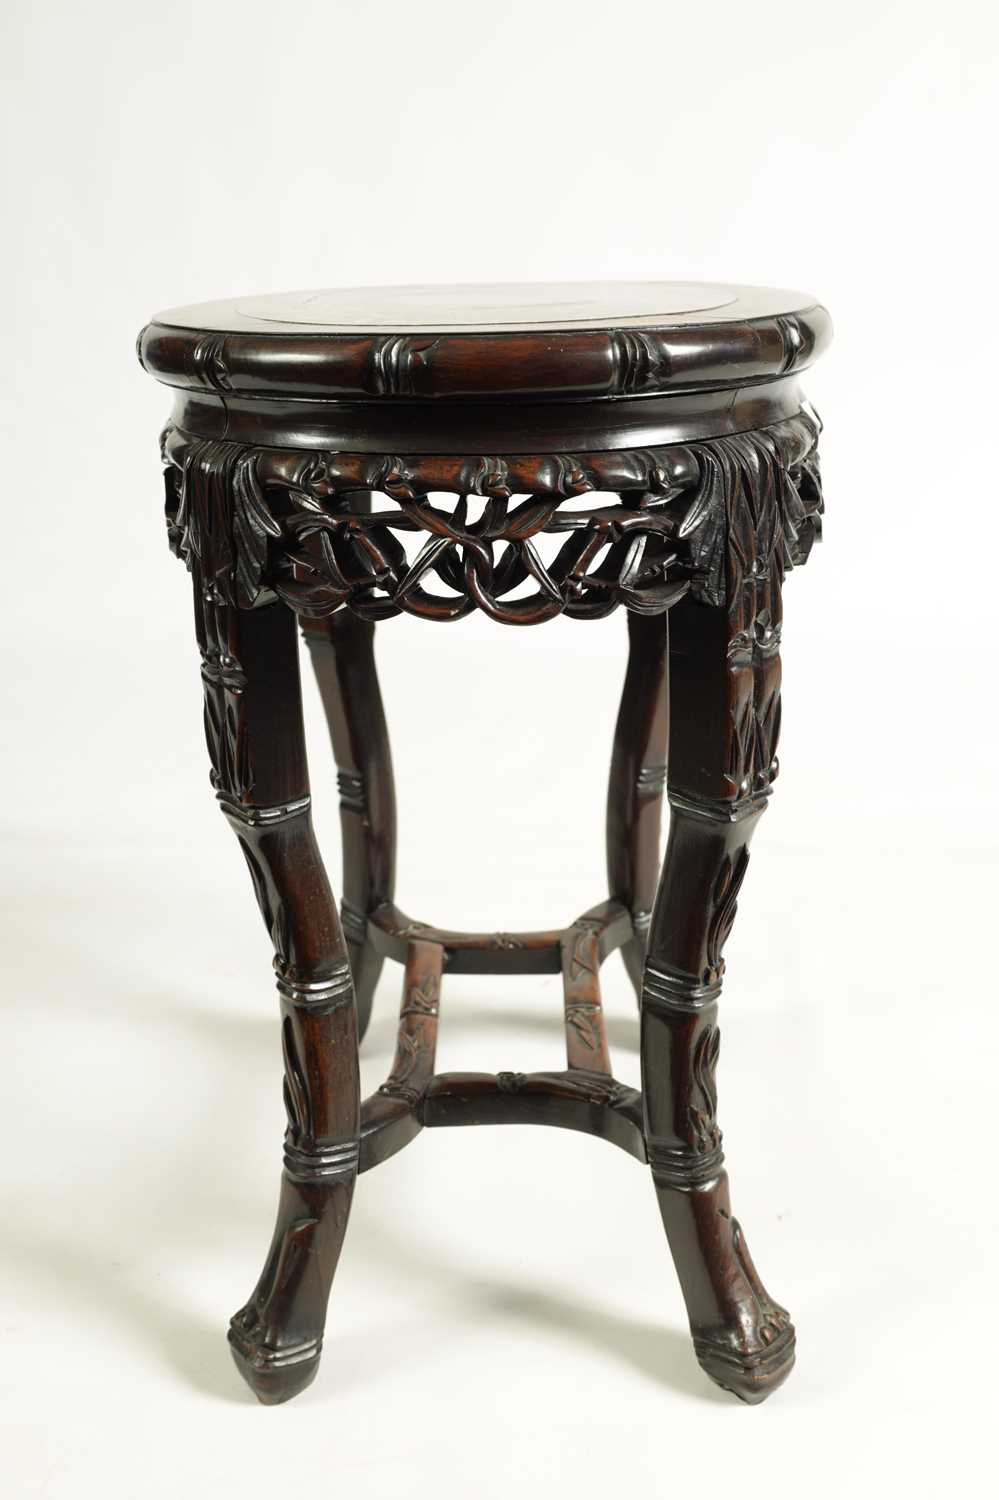 A 19TH CENTURY OVAL CARVED HARDWOOD CHINESE TABLE - Image 7 of 8